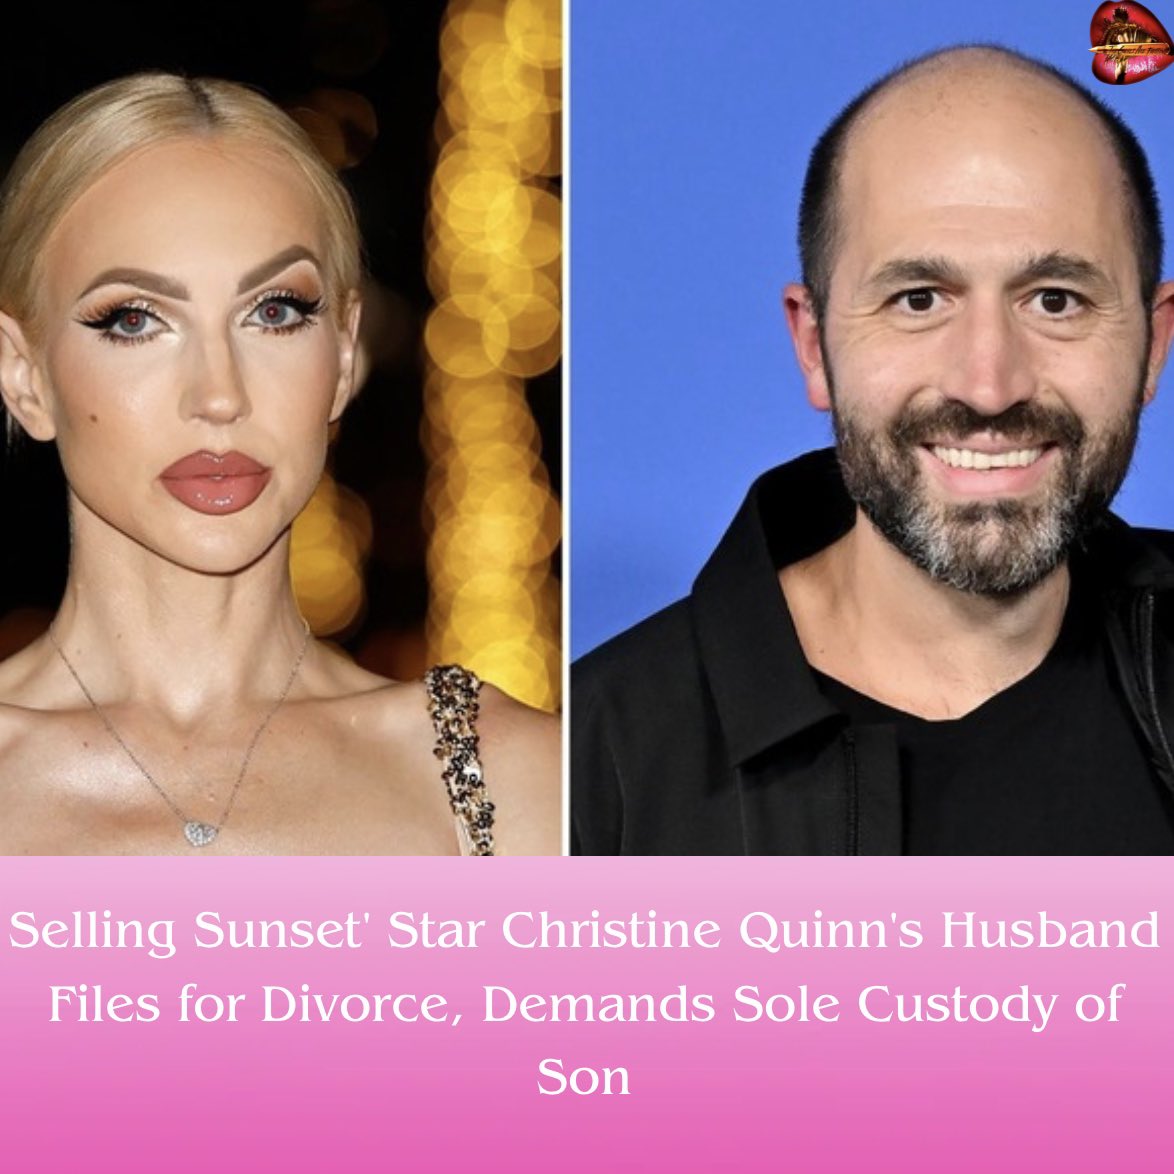 #SellingSunset Star #ChristineQuinn Husband Files for Divorce, Demands Sole Custody of Son.
Dumontet cited 'irreconcilable differences' as the reason behind their split, and checked the box for sole legal and physical custody of their young son.